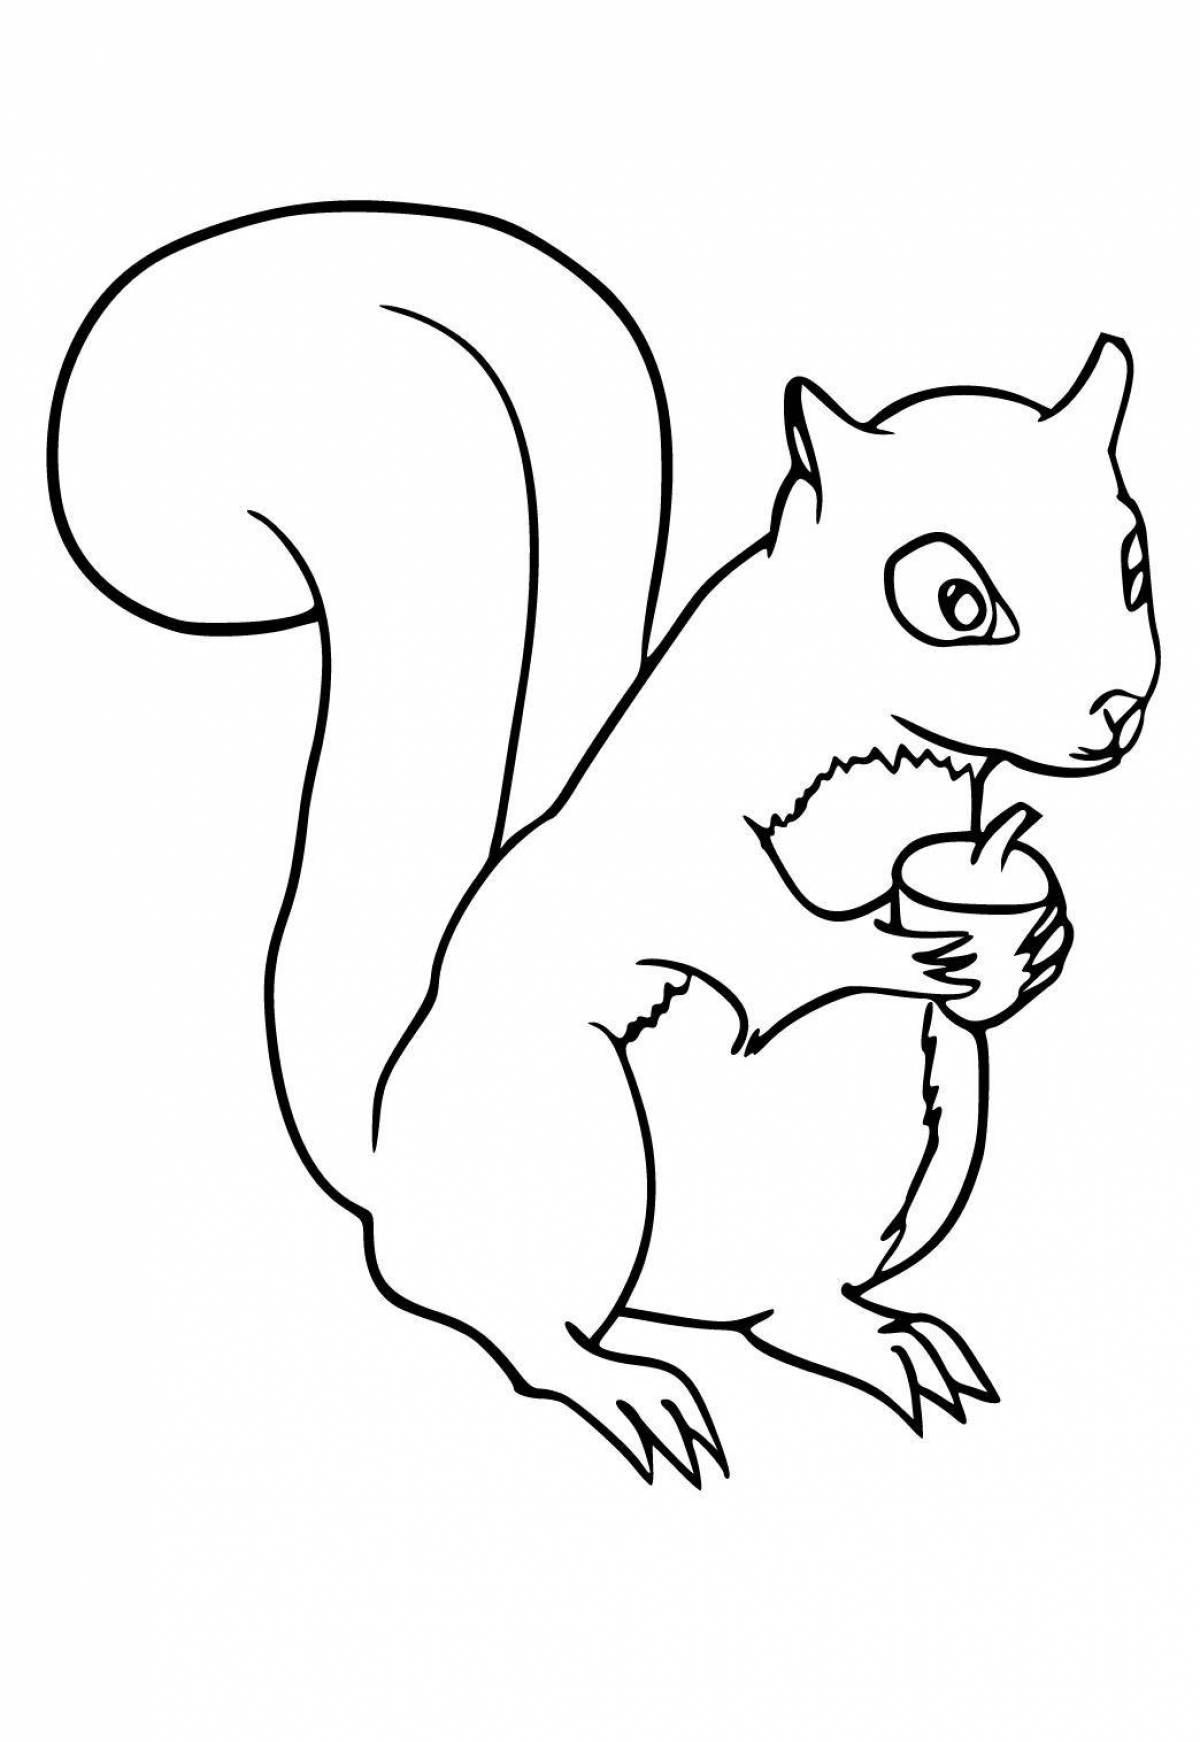 Magic coloring squirrel for children 6-7 years old